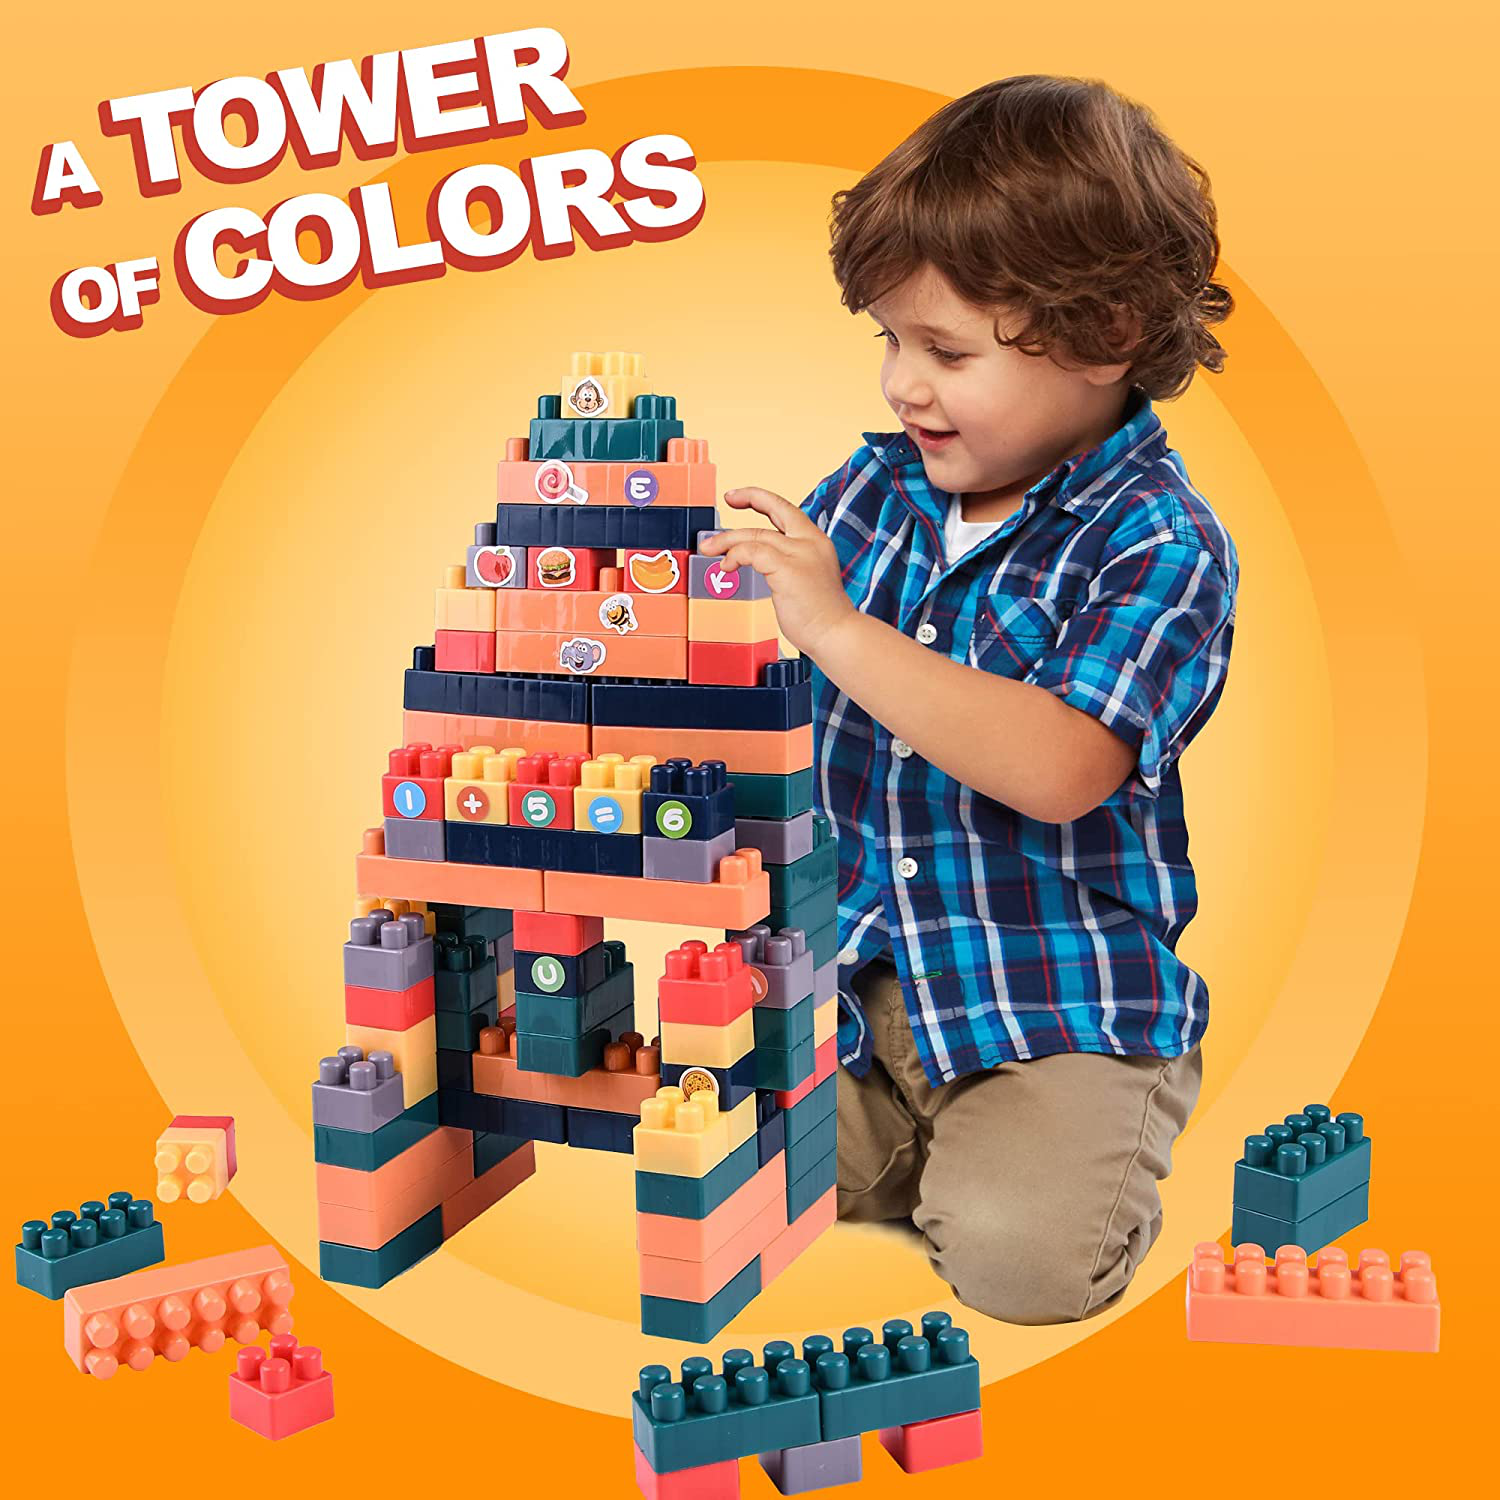 Building Bricks 520 Pieces Set, Classic Preschool Building Sets for Kids, Building Blocks in 6 Colors, Kids Building Bricks Toy, Compatible with All Major Brands for Ages 3 4 5 6 7 8 Year Old Boy Girl